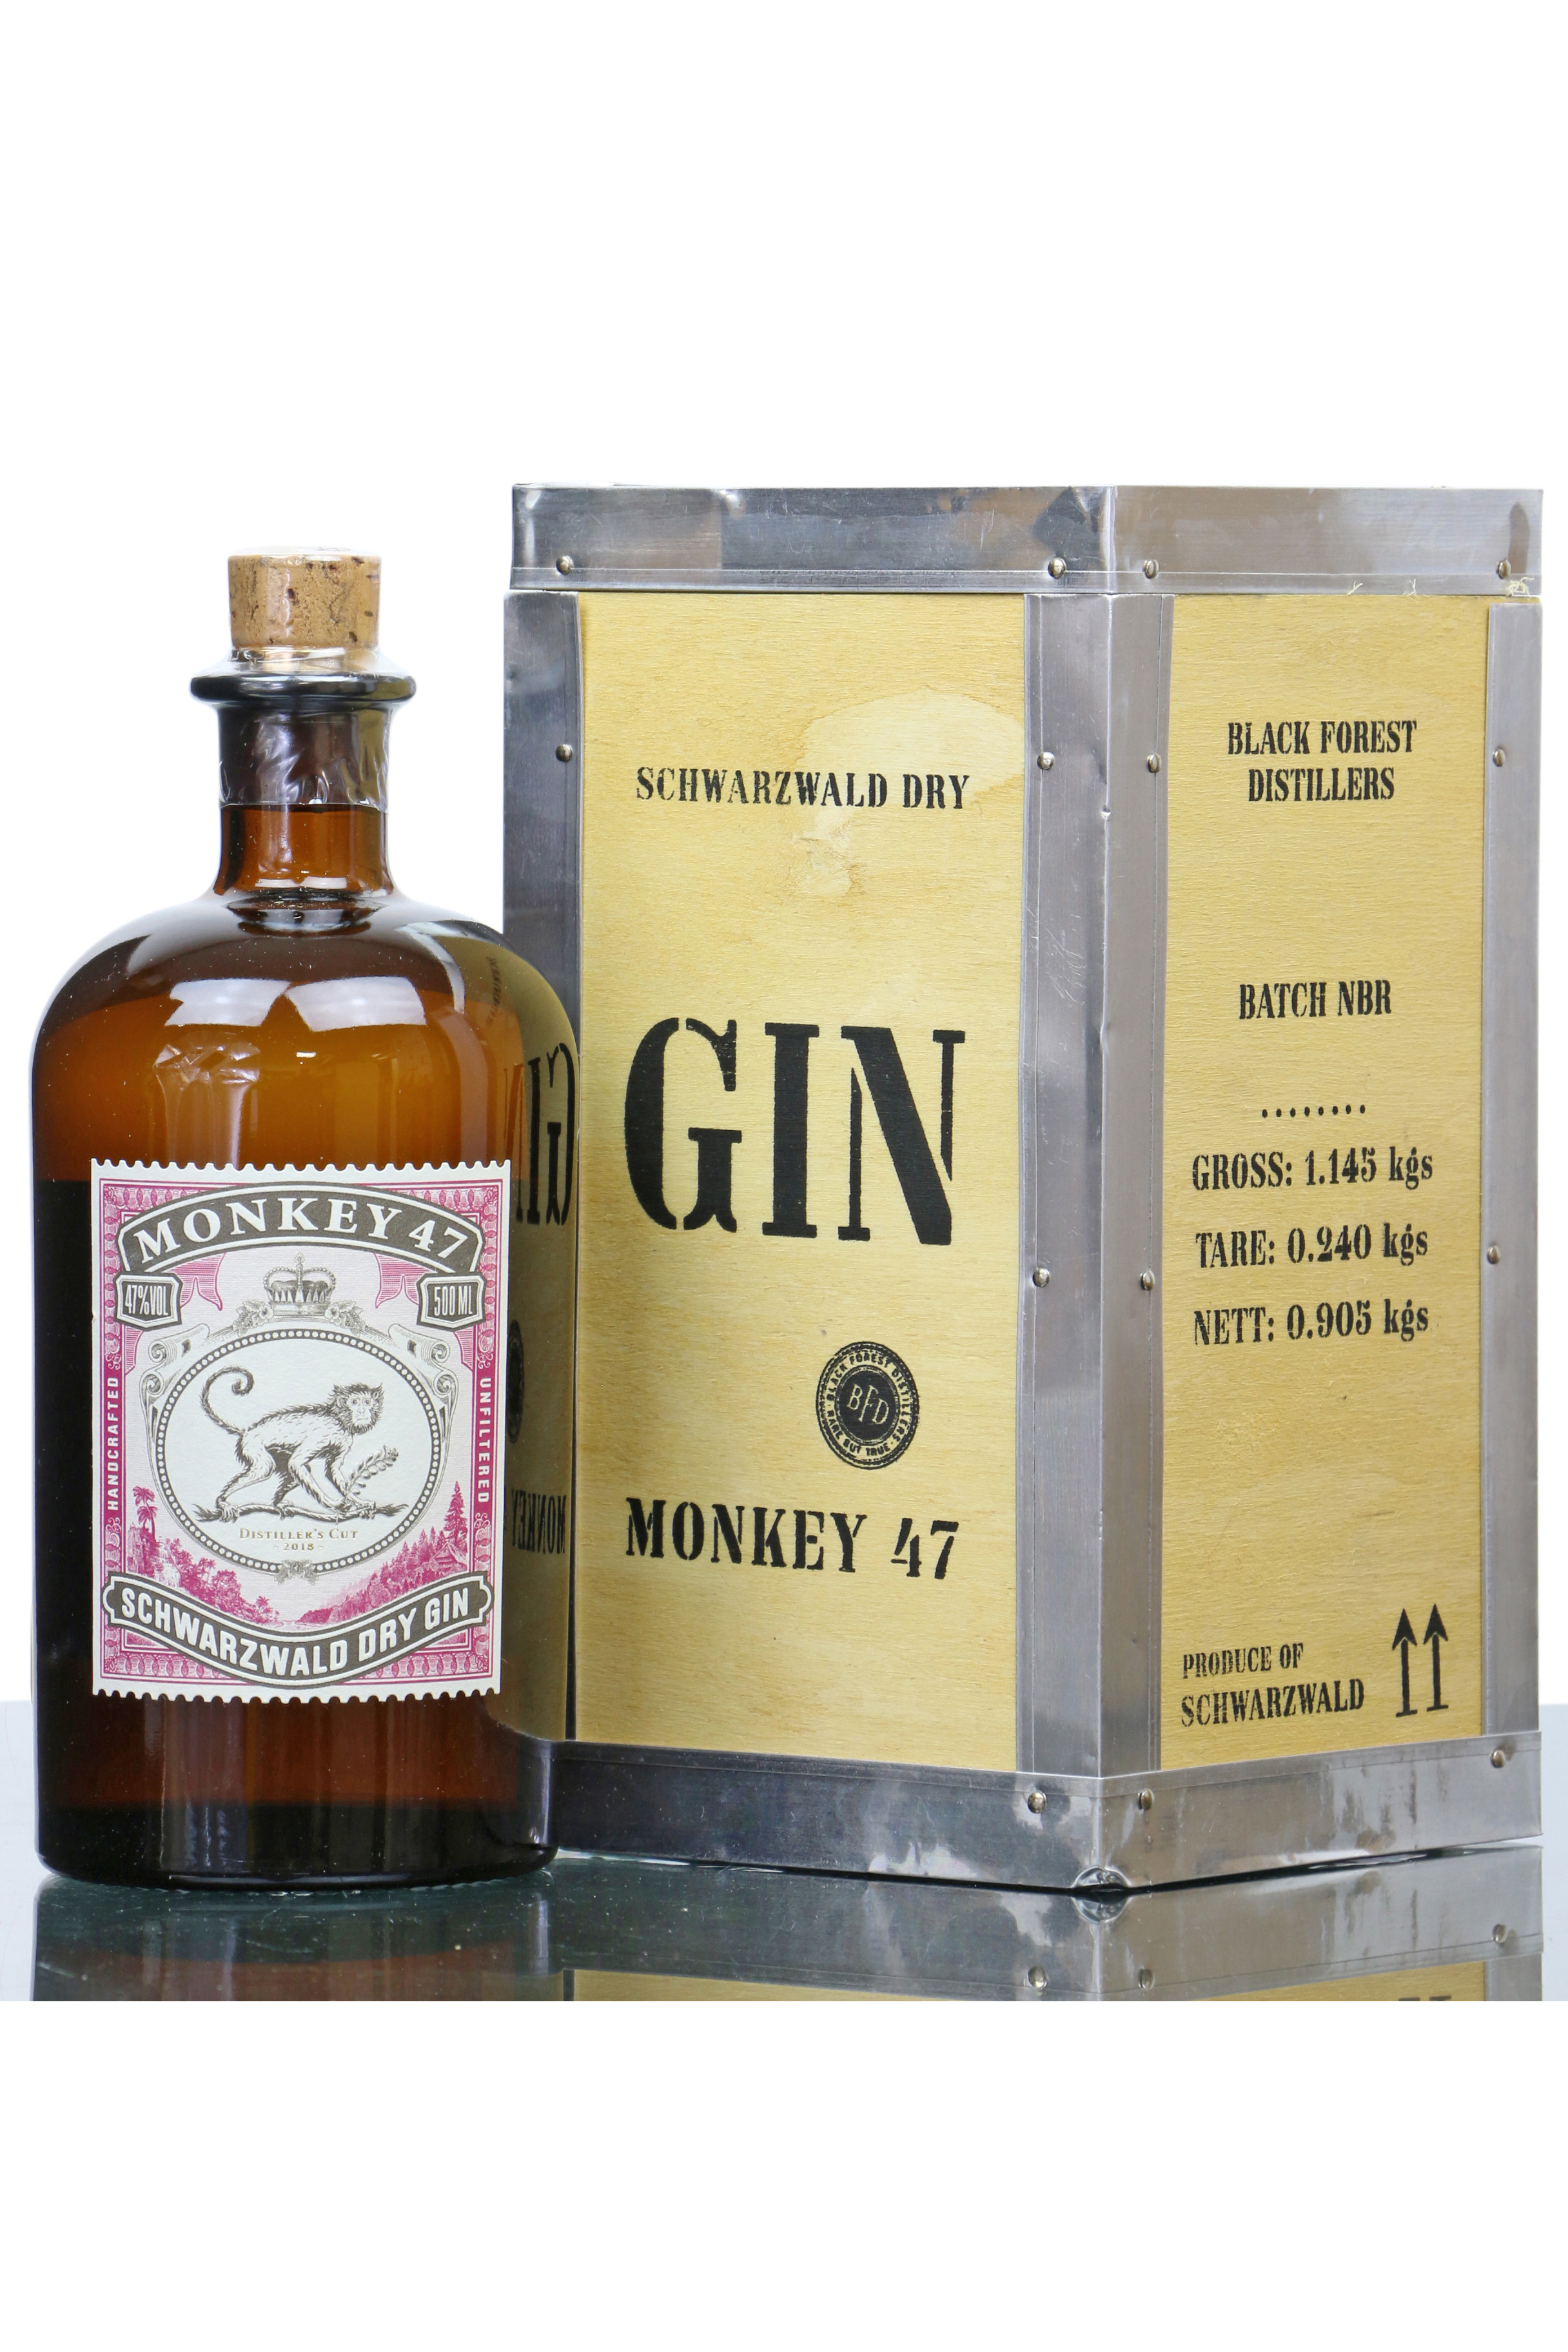 Monkey 47 Auctions (50cl) - Gin 2018 - Cut Schwarzwald Dry Whisky Director\'s Just